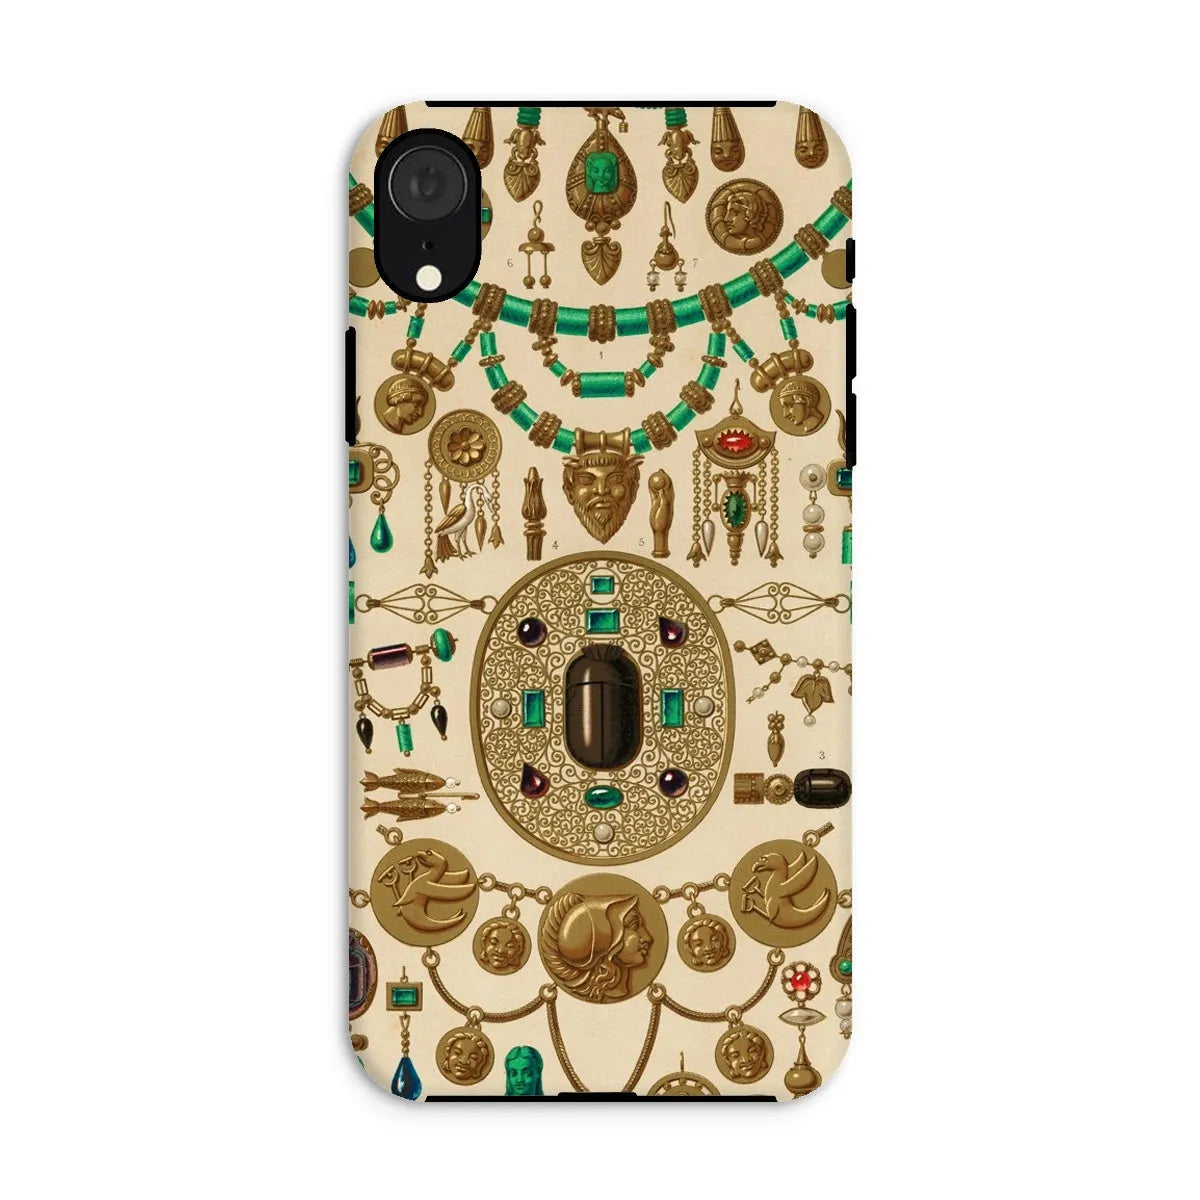 Etruscan Jewelry By Auguste Racinet Art Phone Case - Iphone Xr / Matte - Mobile Phone Cases - Aesthetic Art